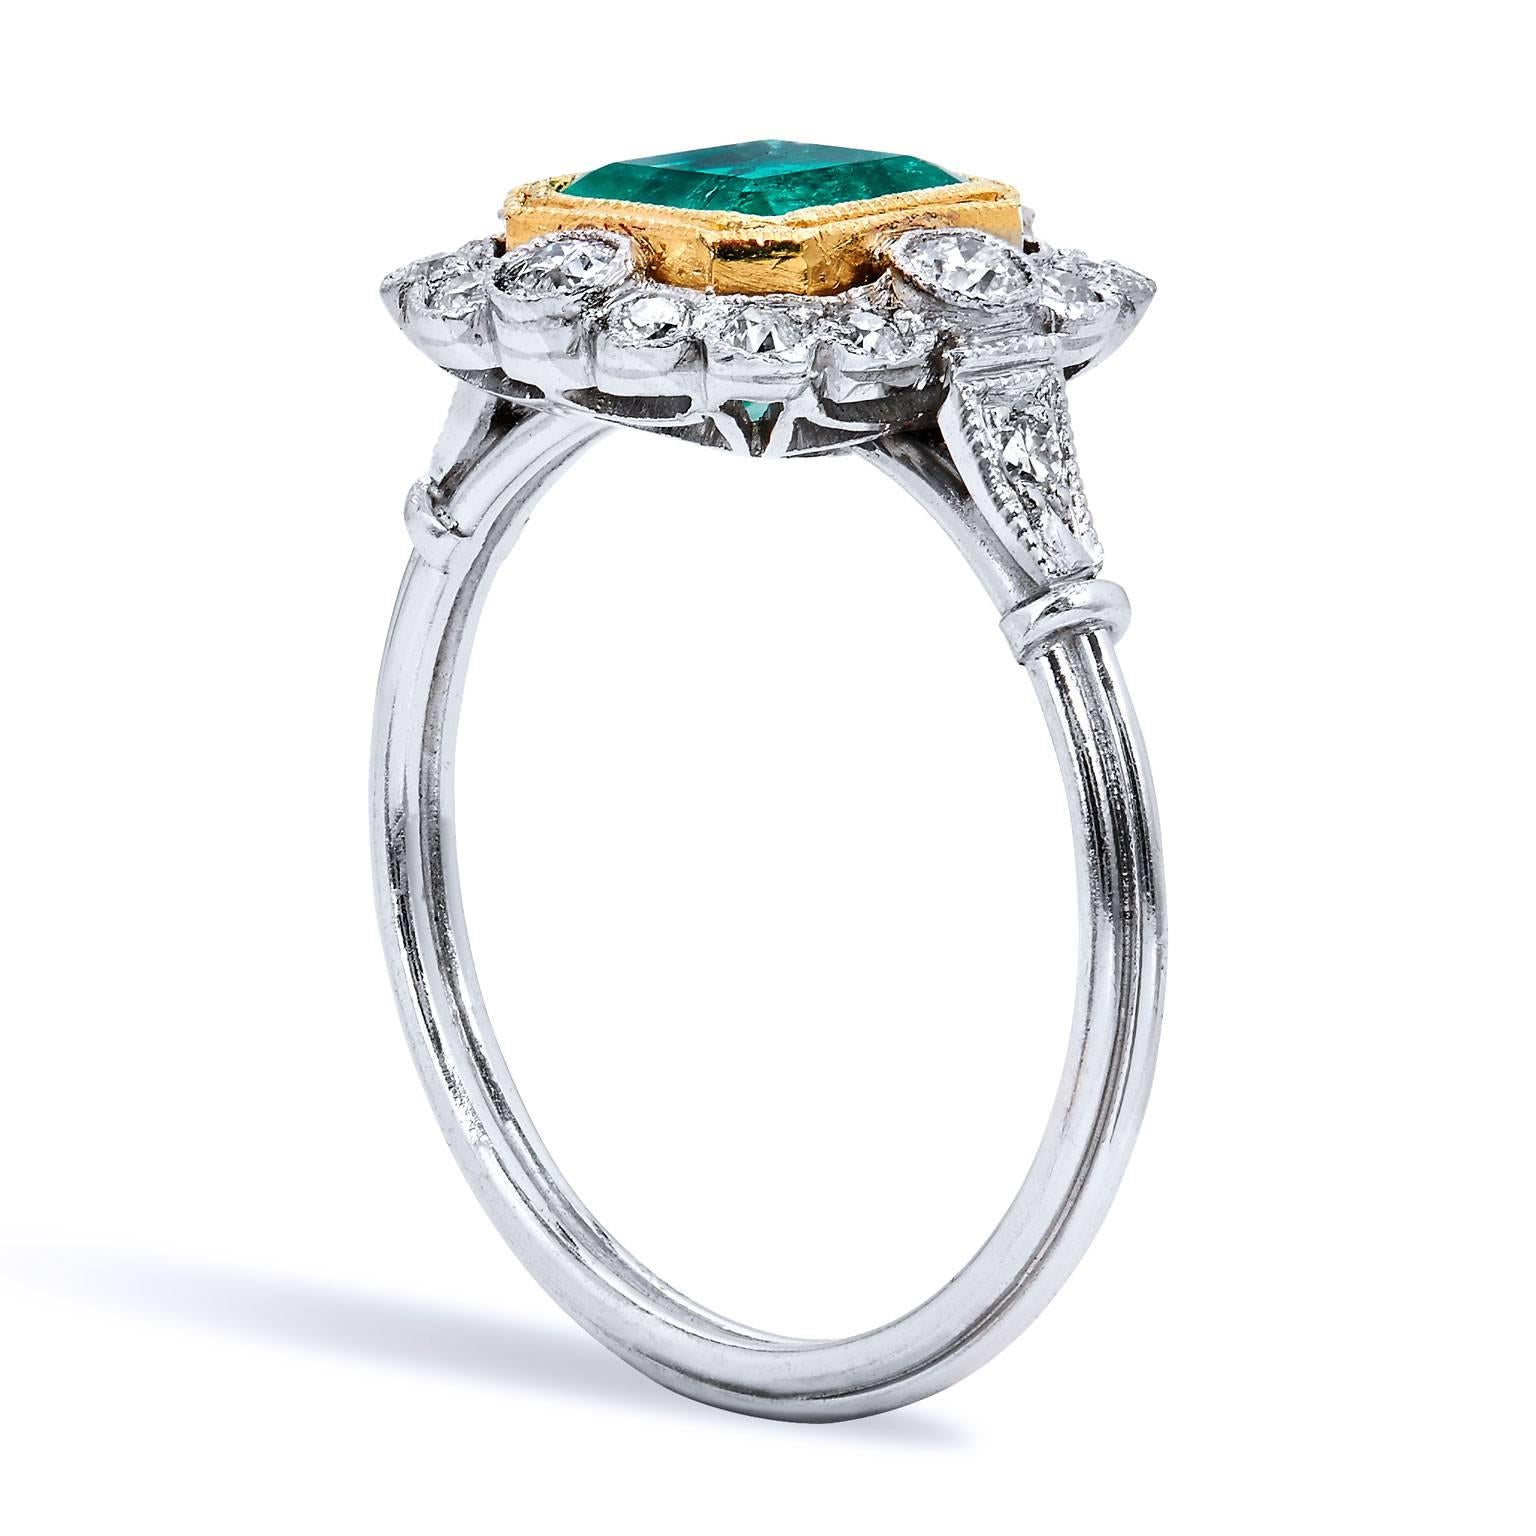 GIA CERTIFIED Art Deco Inspired 1.60 Carat Colombian Emerald Diamond Yellow Gold Platinum Ring

This beautiful creation is Art Deco inspired made of platinum and 18 karat yellow gold.  It features a 1.60 carat Colombian Emerald set at center. For